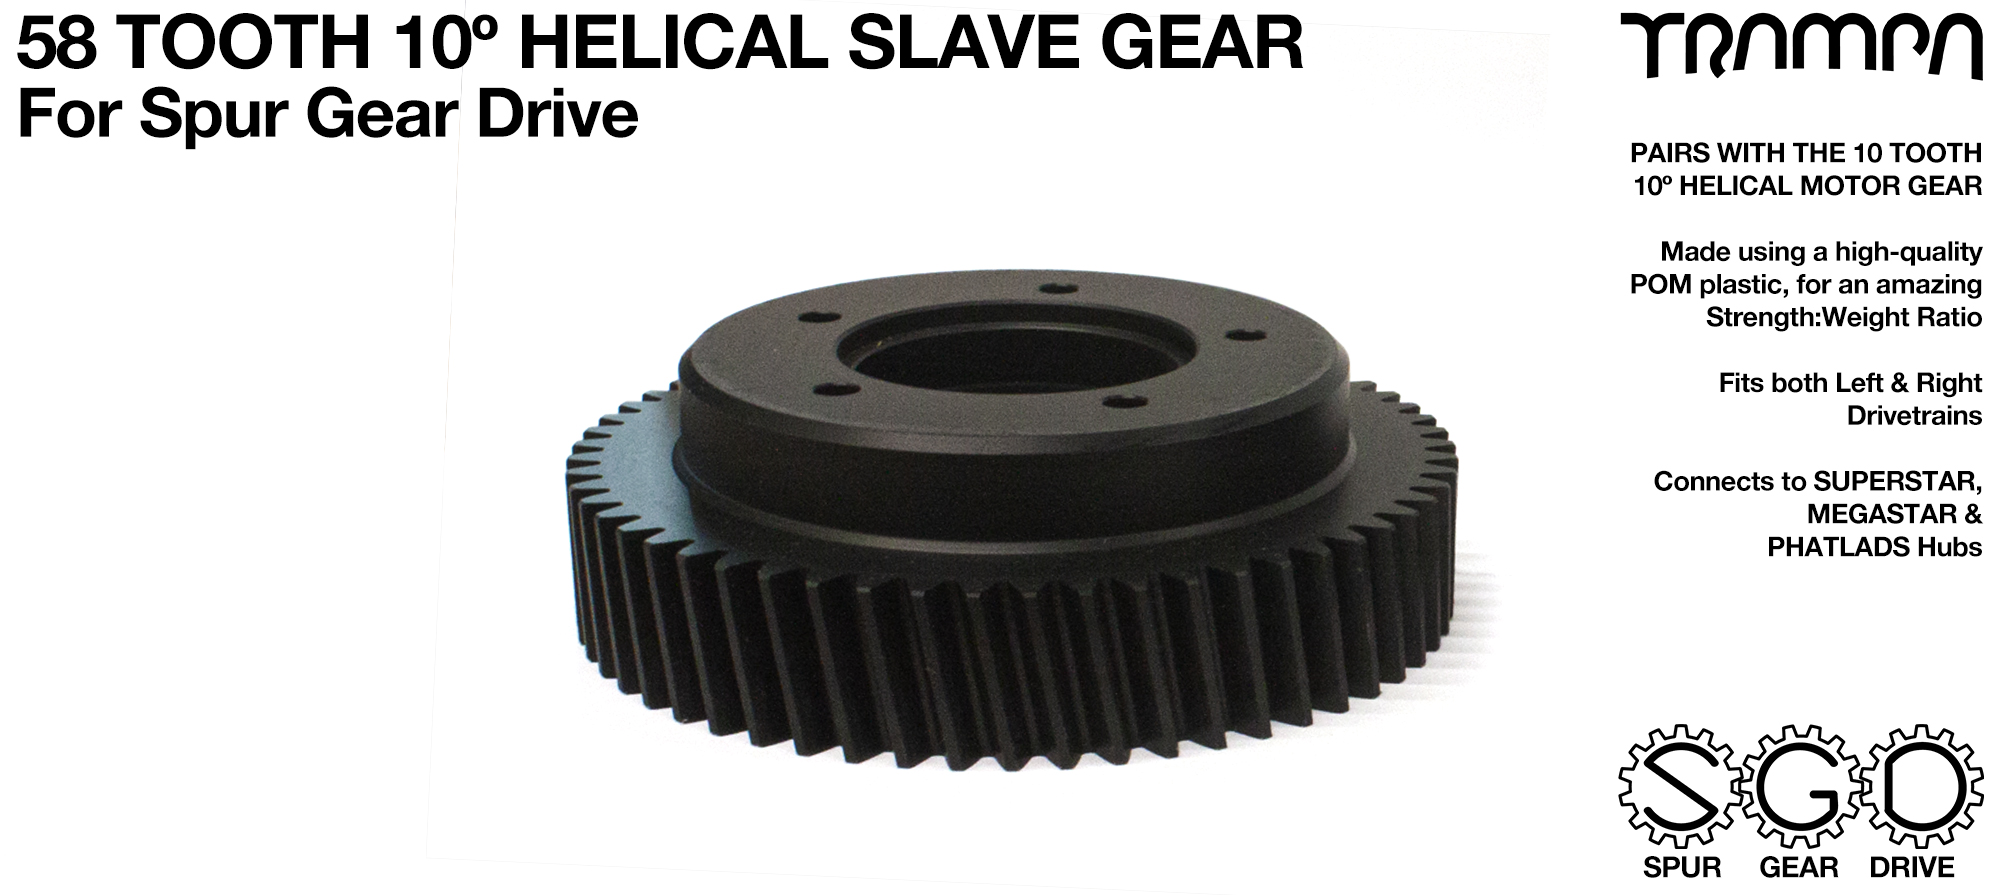 Spur Gear Drive 58 Tooth 10º HELICAL Cut Slave Pulley - POM